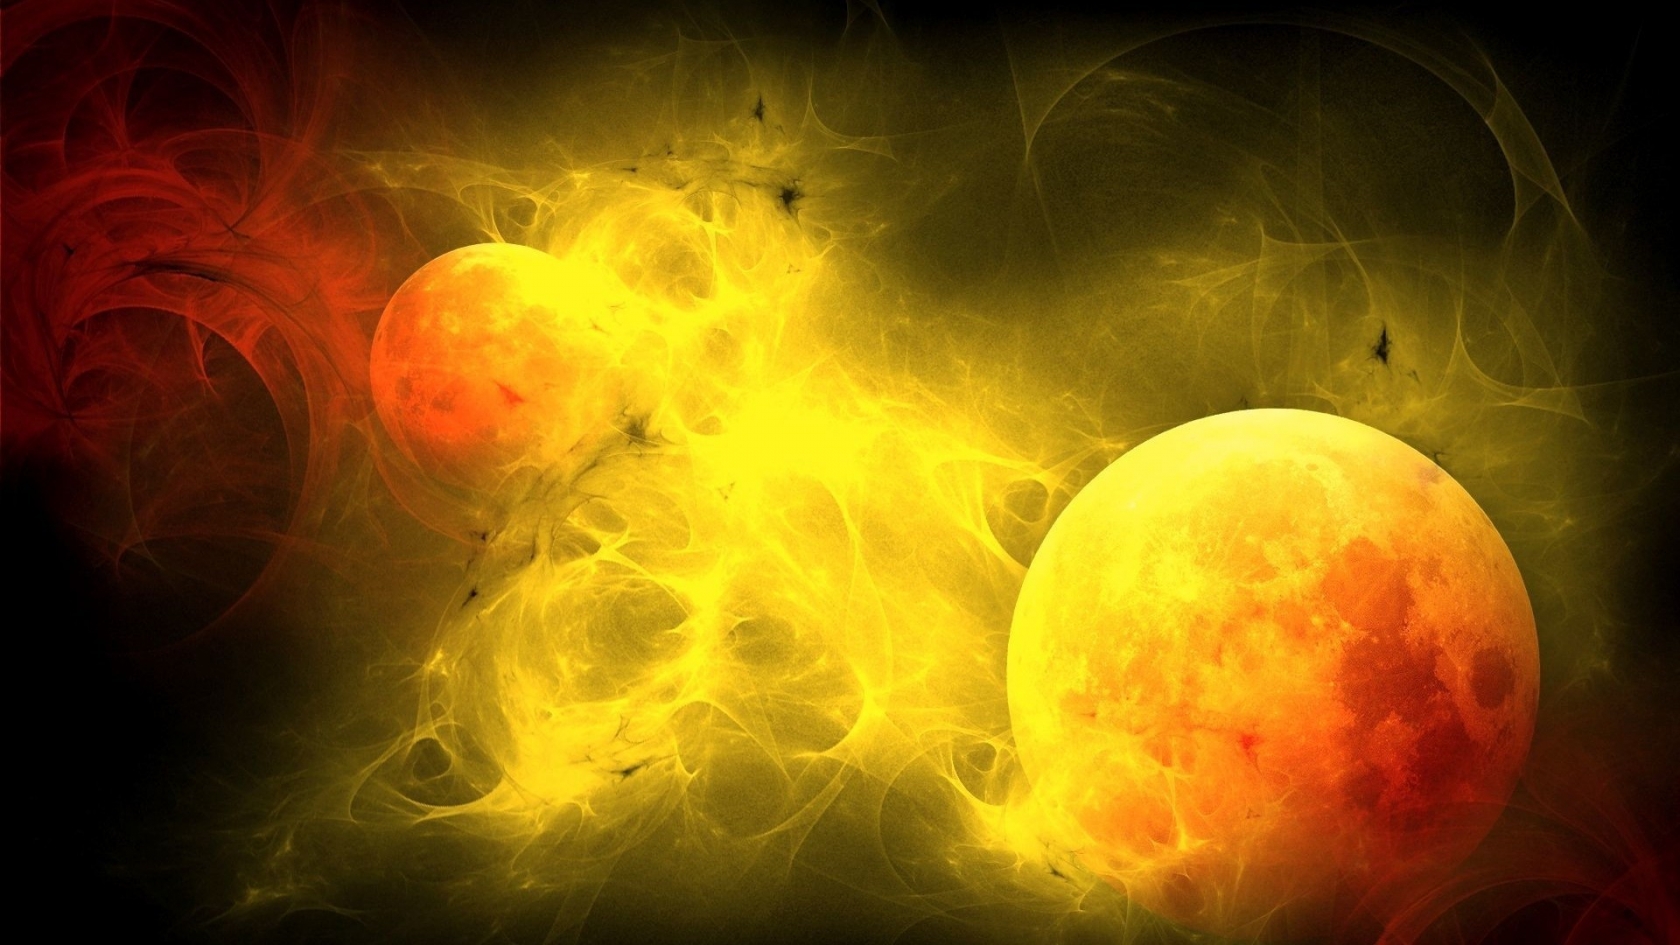 Fire Planets for 1680 x 945 HDTV resolution